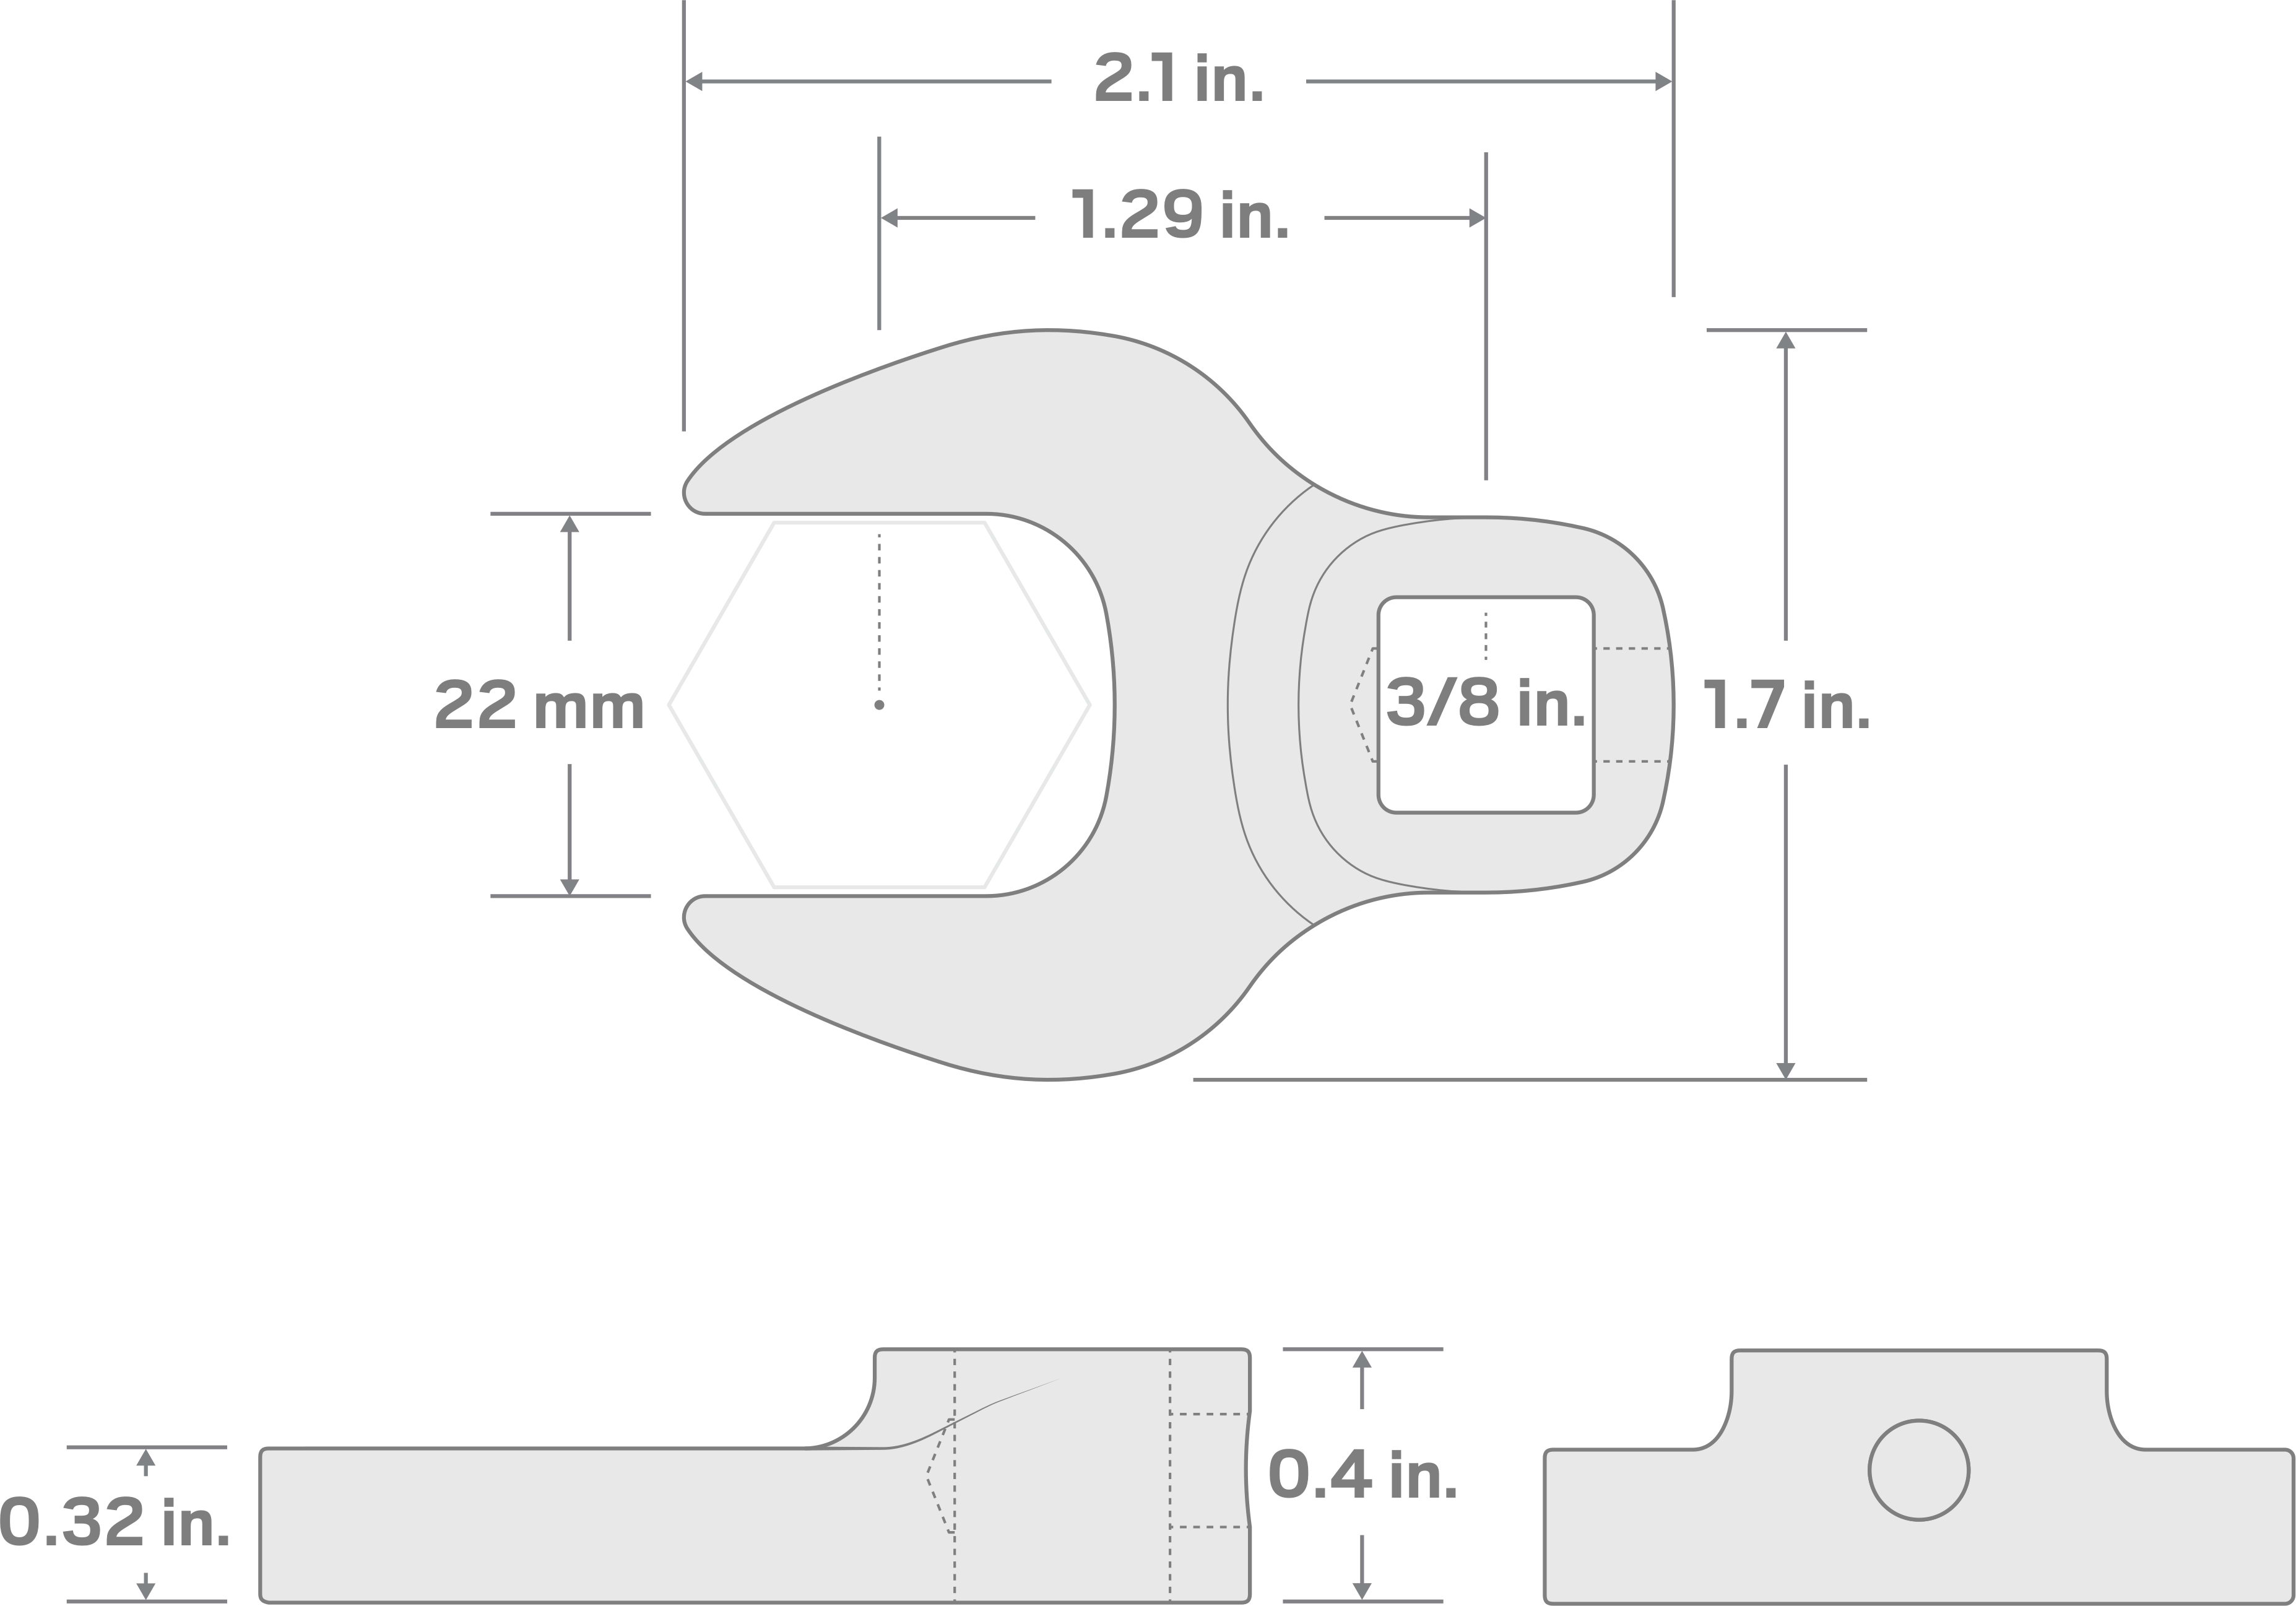 Specs for 3/8 Inch Drive x 22 mm Crowfoot Wrench